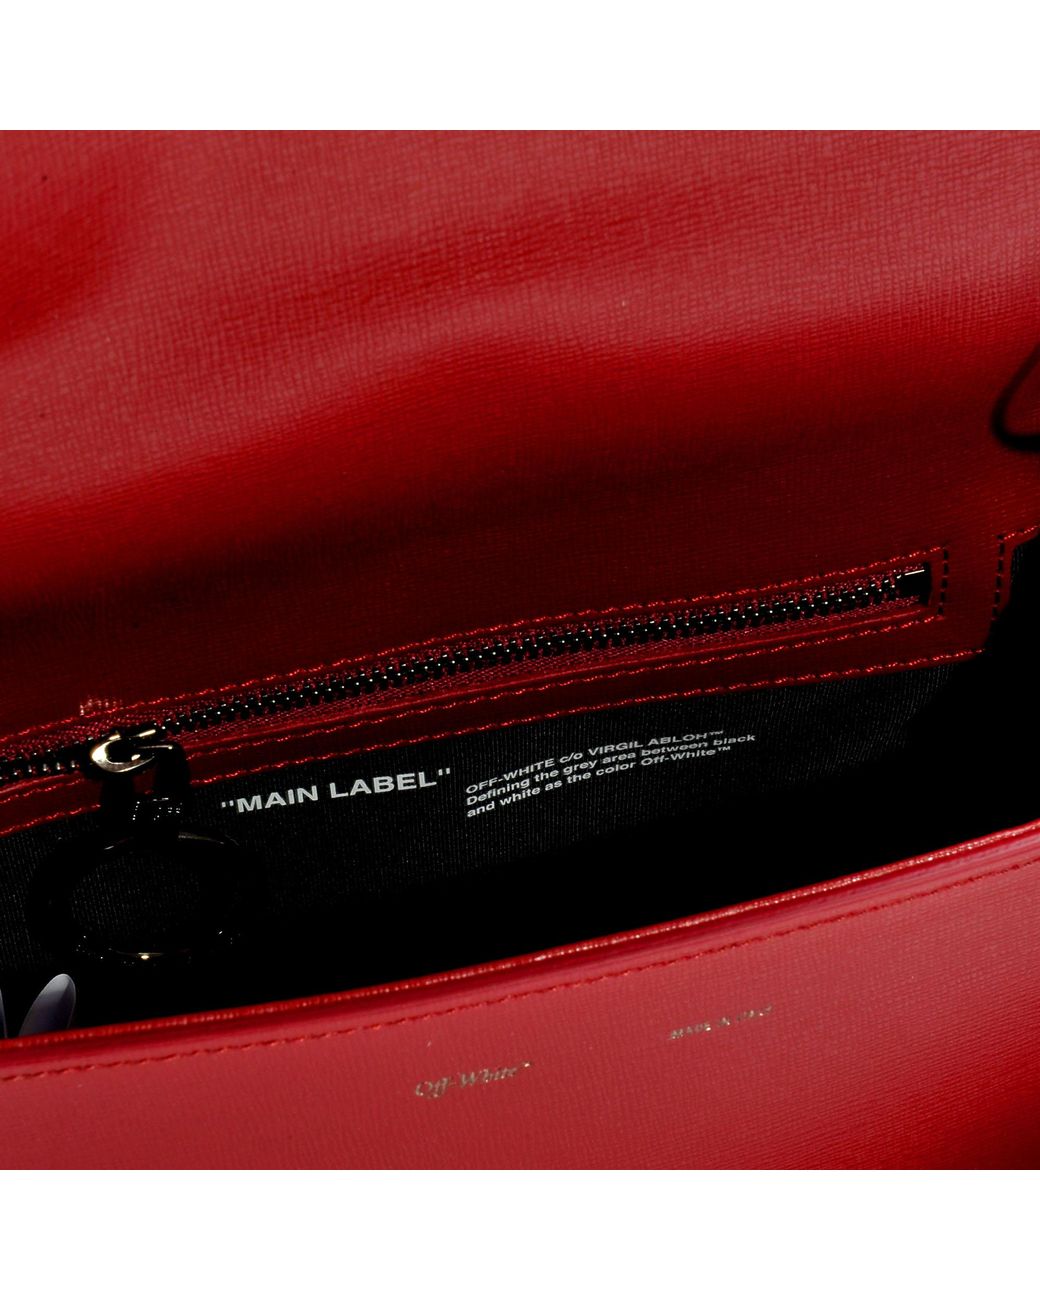 Off-White Diag Flap Bag Red